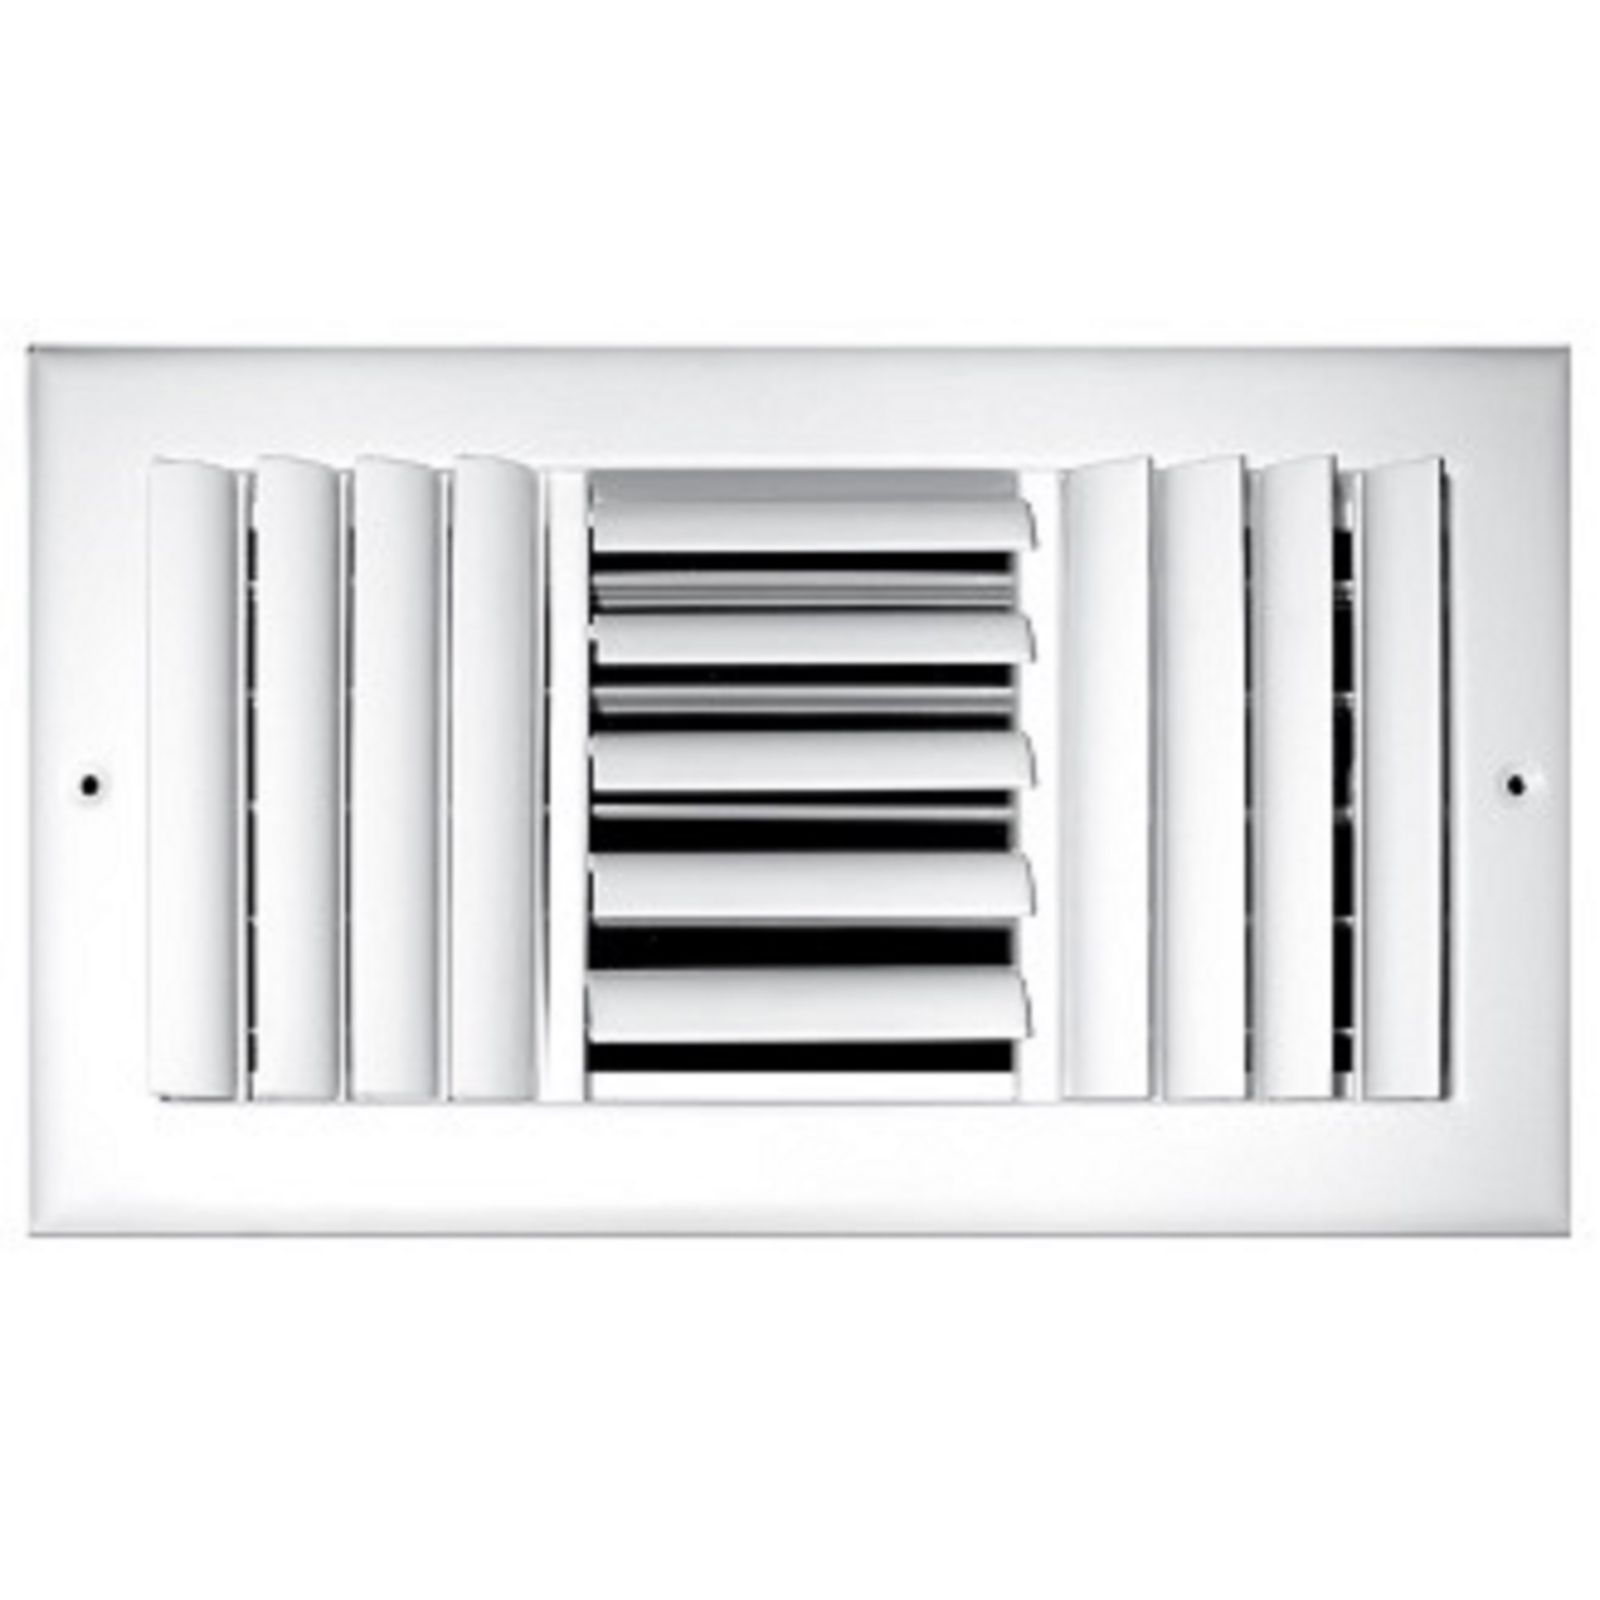 TRUaire 303M 10X10 - Steel Adjustable Curved Blade Wall/Ceiling Register With Multi Shutter Damper, 3-Way, White, 10" X 10"